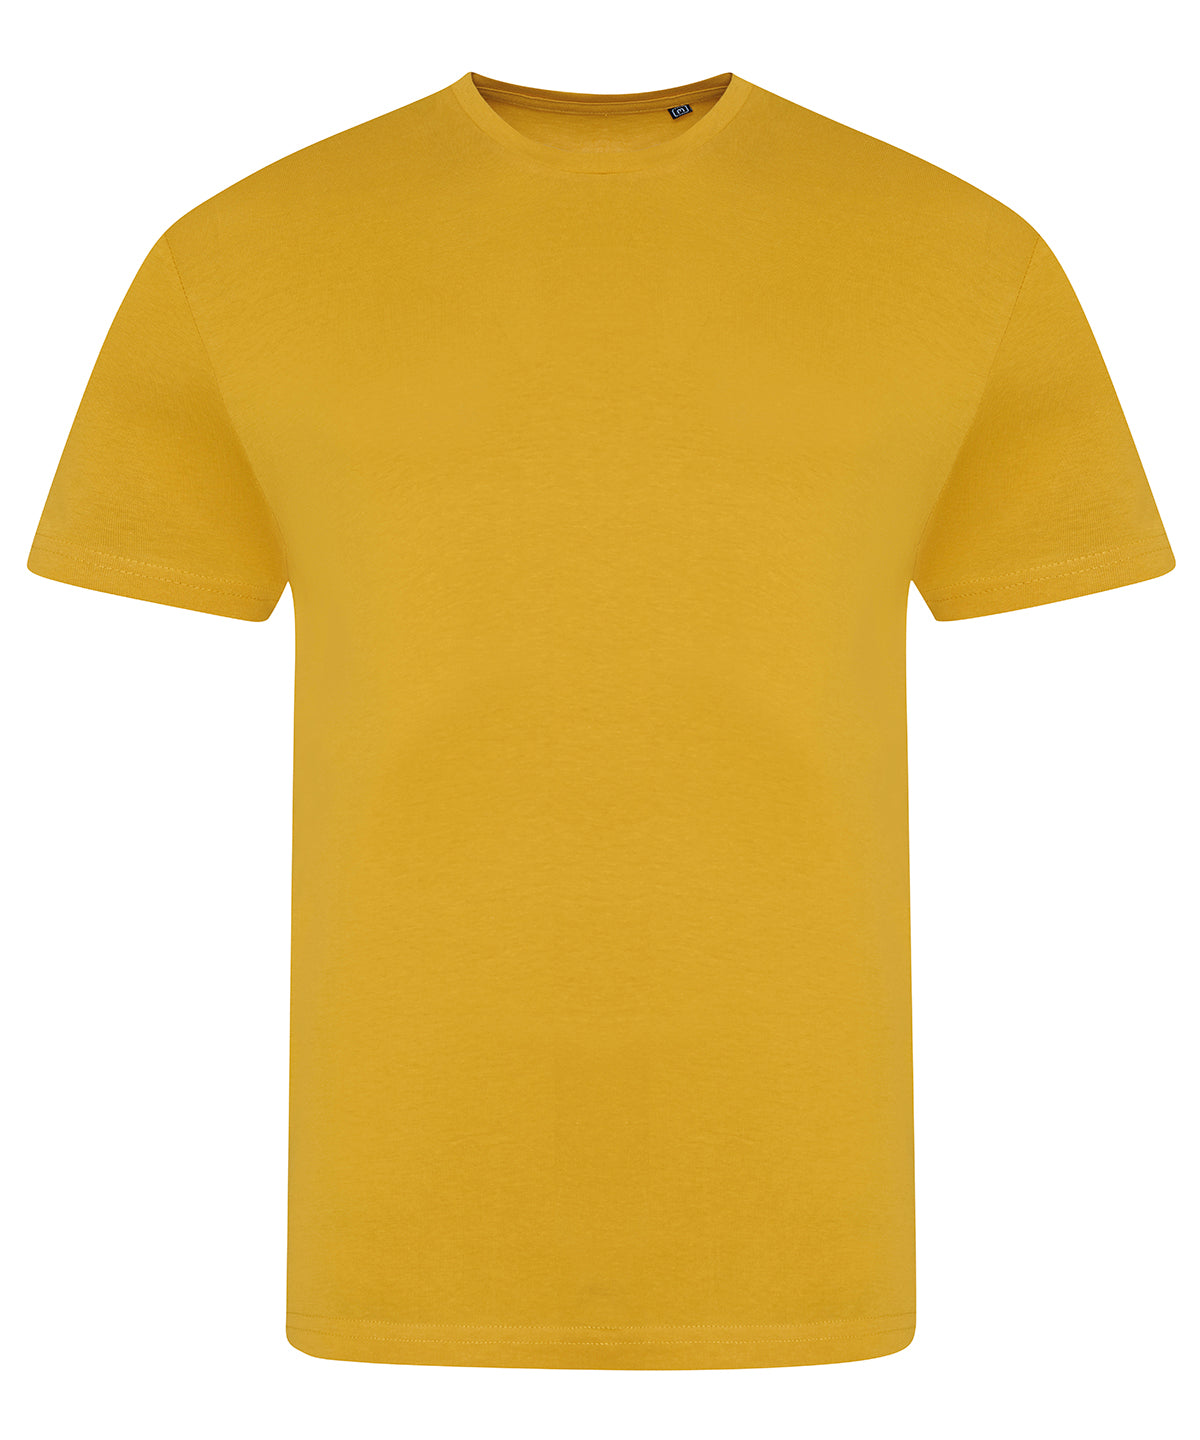 Personalised T-Shirts - Mustard AWDis Just T's The 100 T